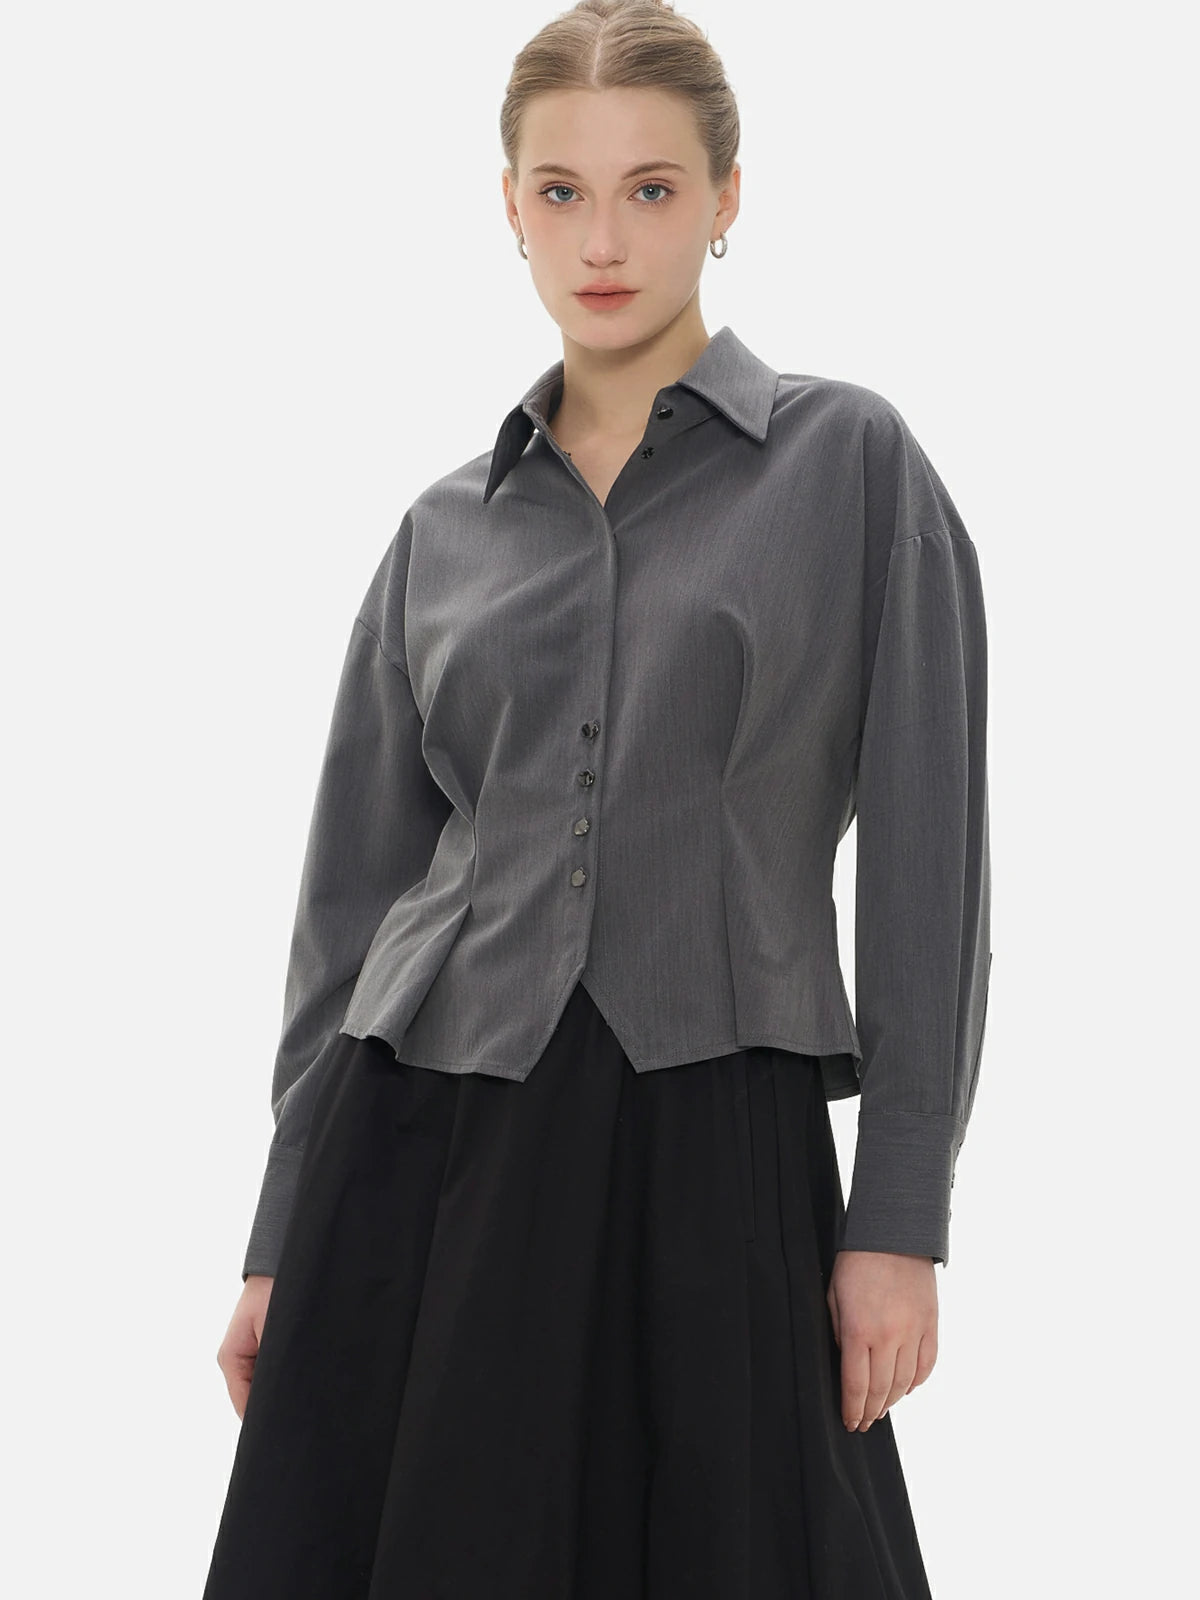 Elevate your style with this collared blouse featuring a pleated design, cinched waist, and dropped-shoulder sleeves.